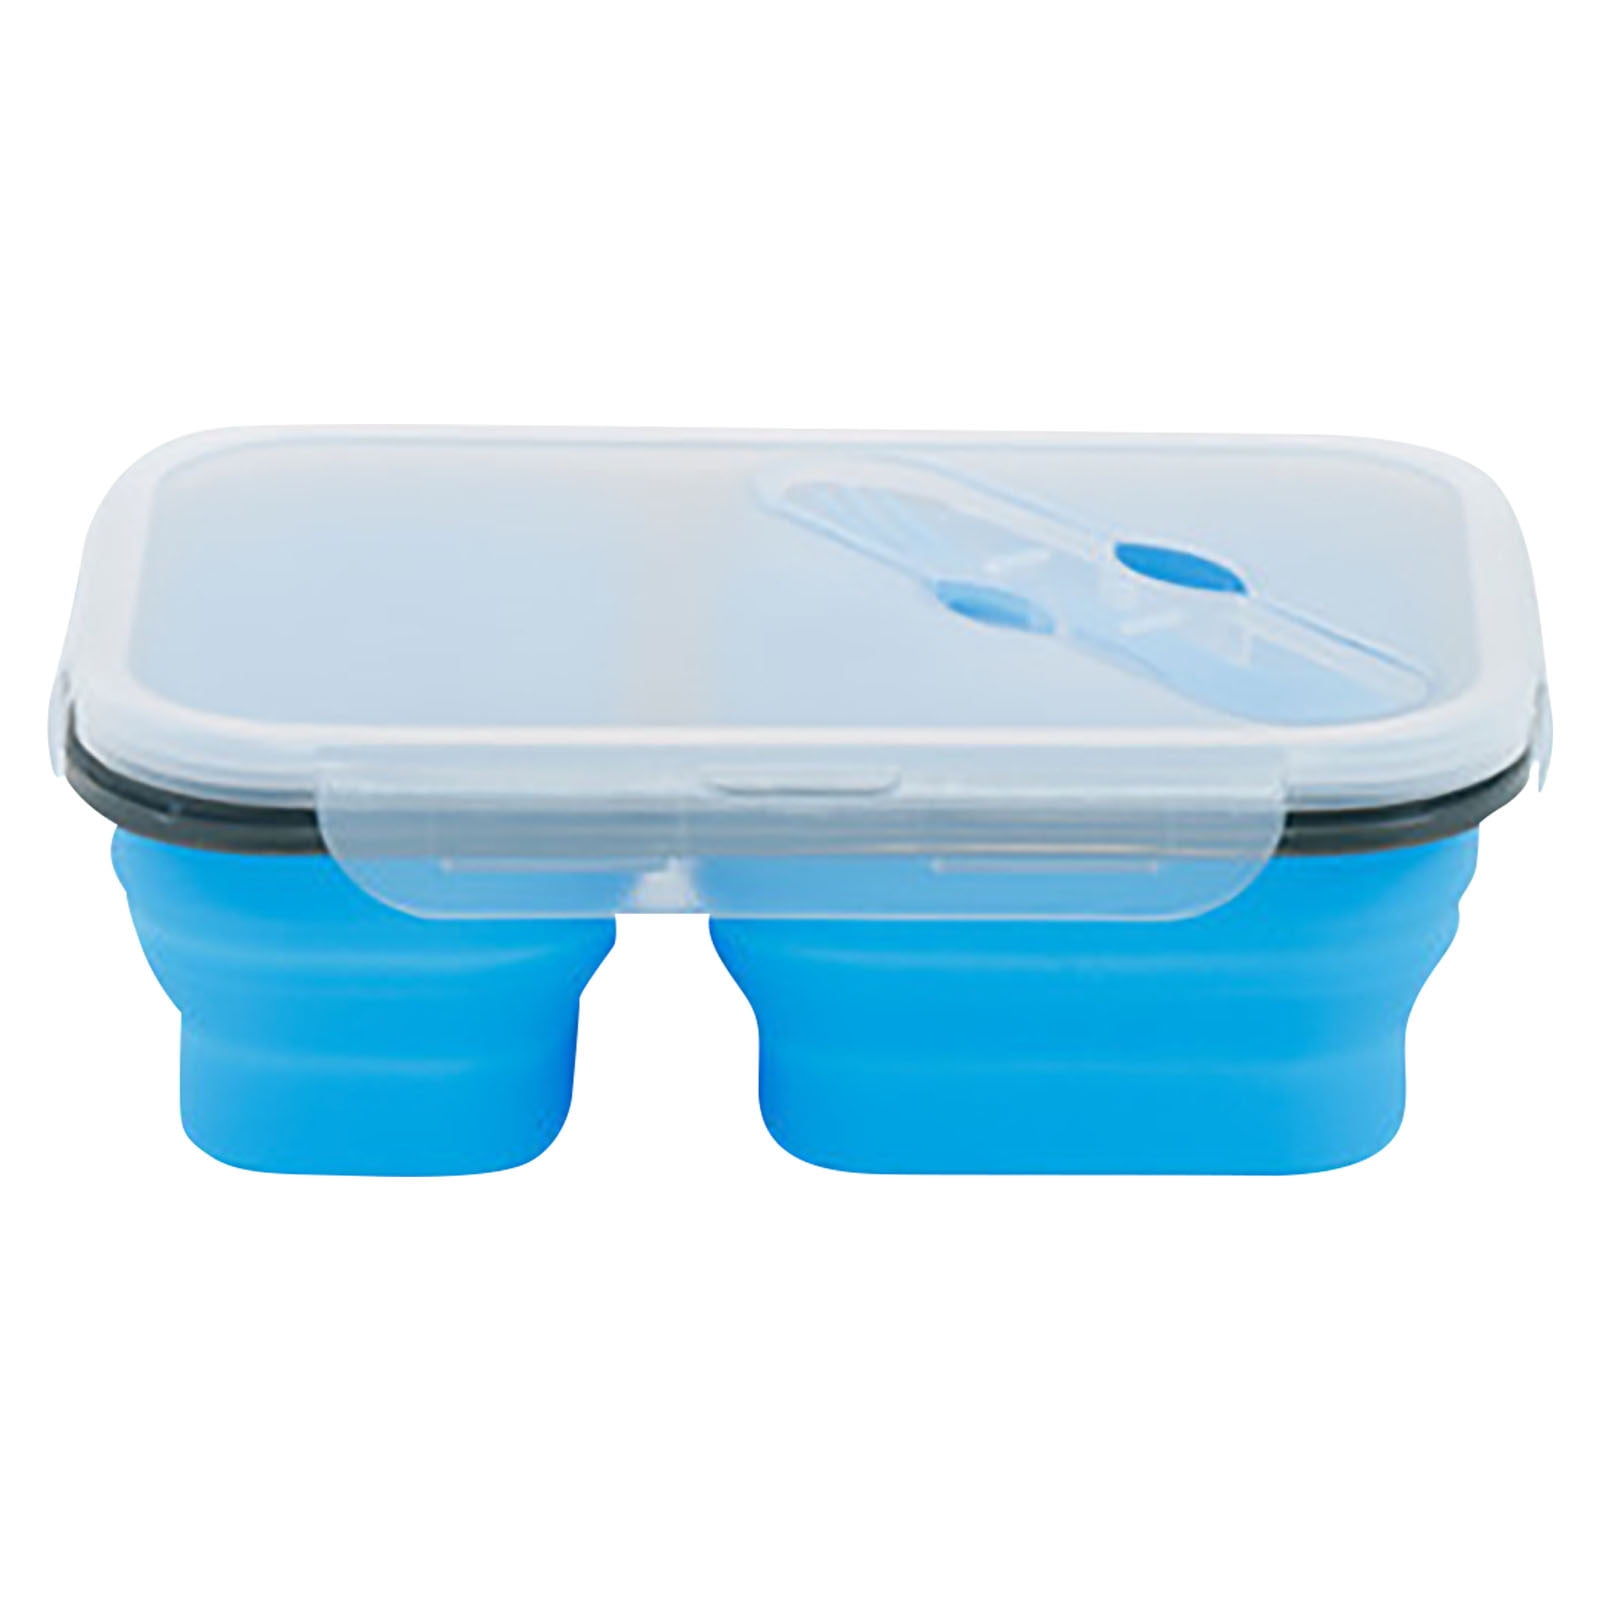 Portable Silicone Thin Lunch Box For Kids Microwave Oven, Rectangular  Shape, Three Cell Food Storage Container For Travel And Outdoors From  Hx_zaka, $6.37